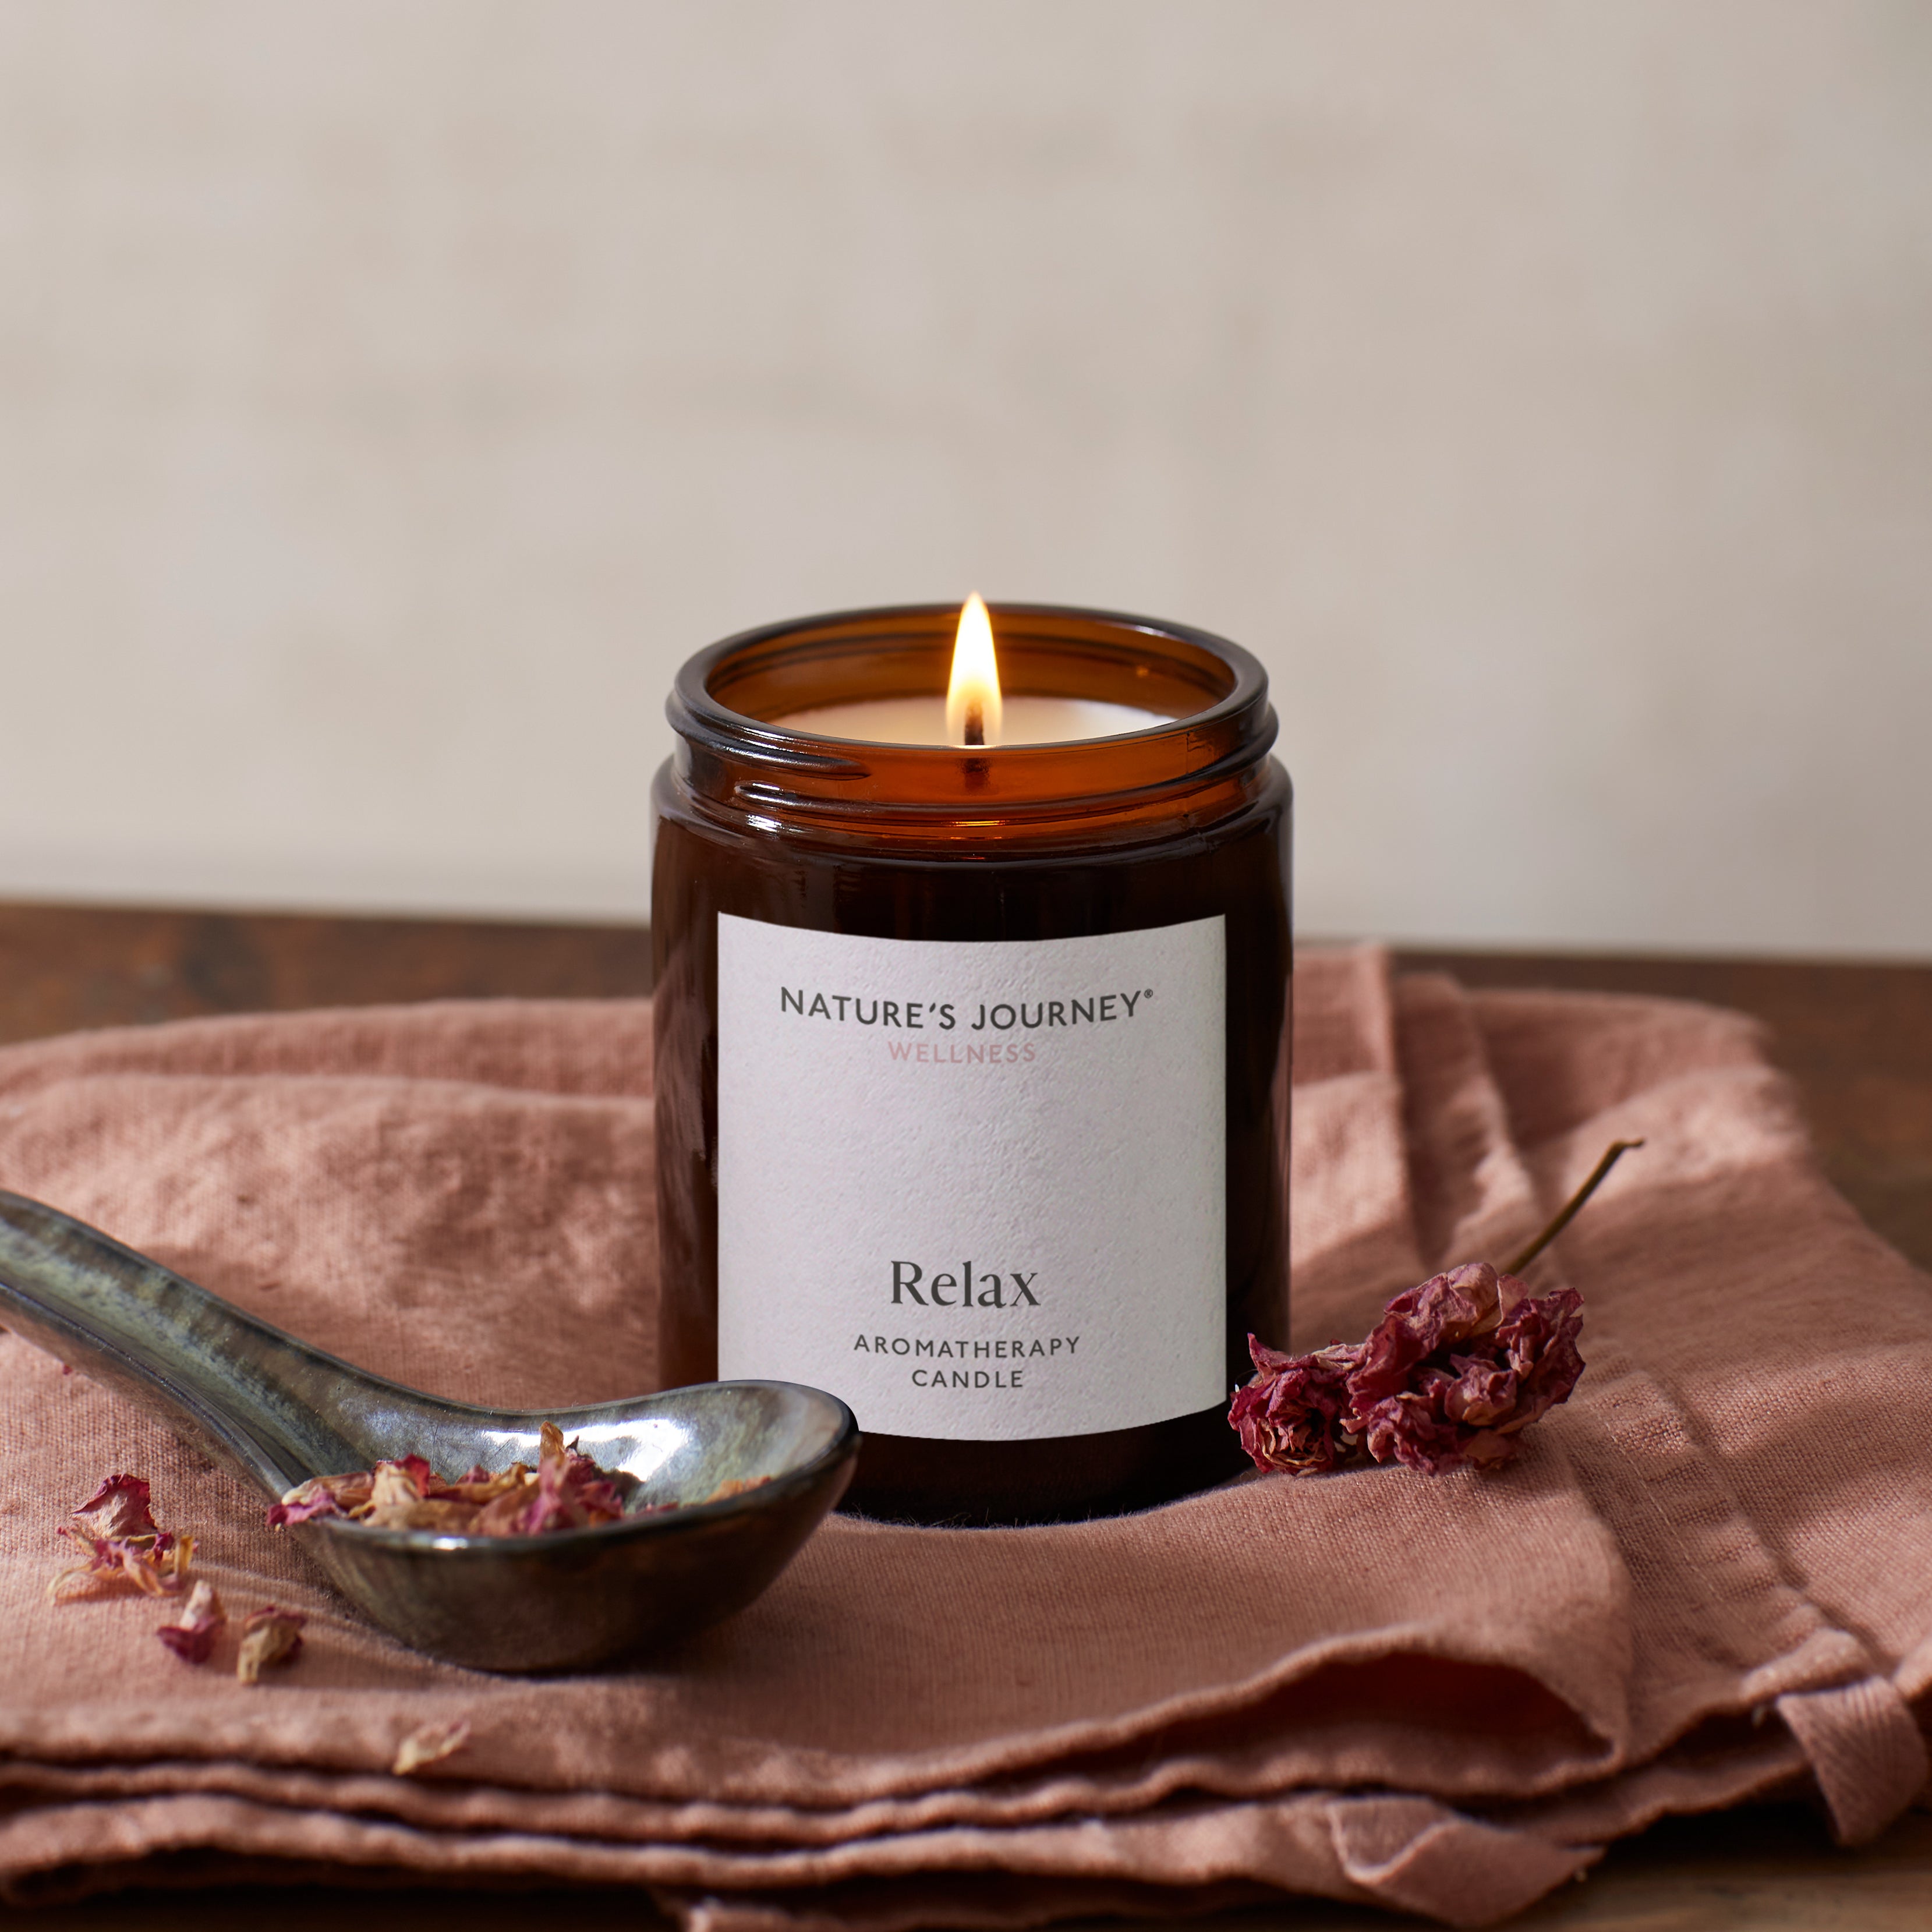 NJ_Relax_Aromatherapy_Candle_Solo_1200x1200_2.jpg